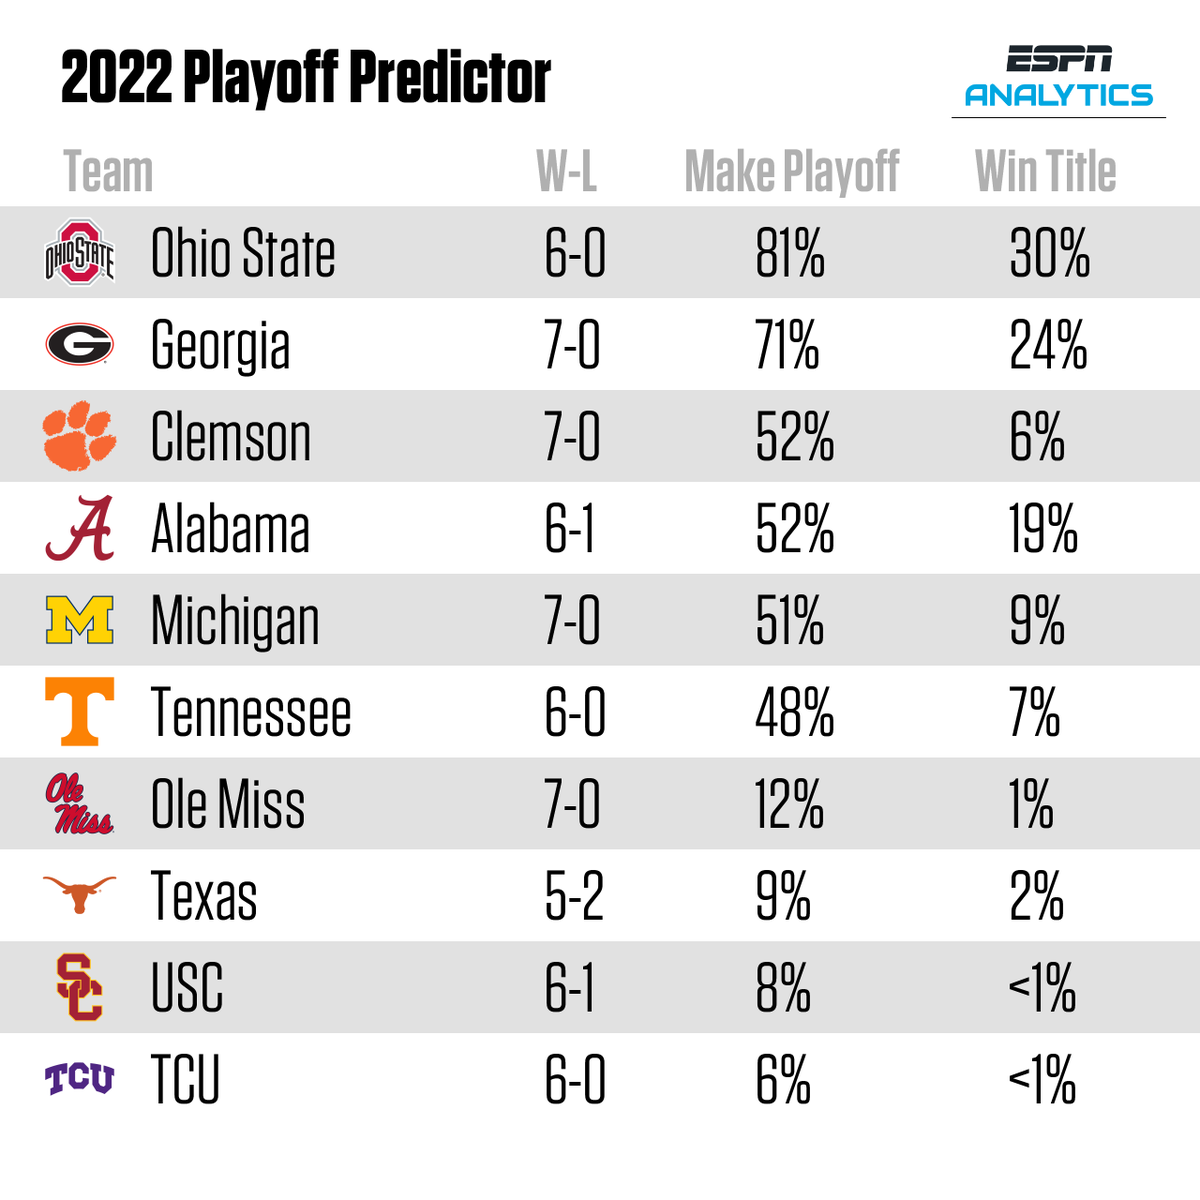 Seth Walder on Twitter "Updated College Football Playoff chances from